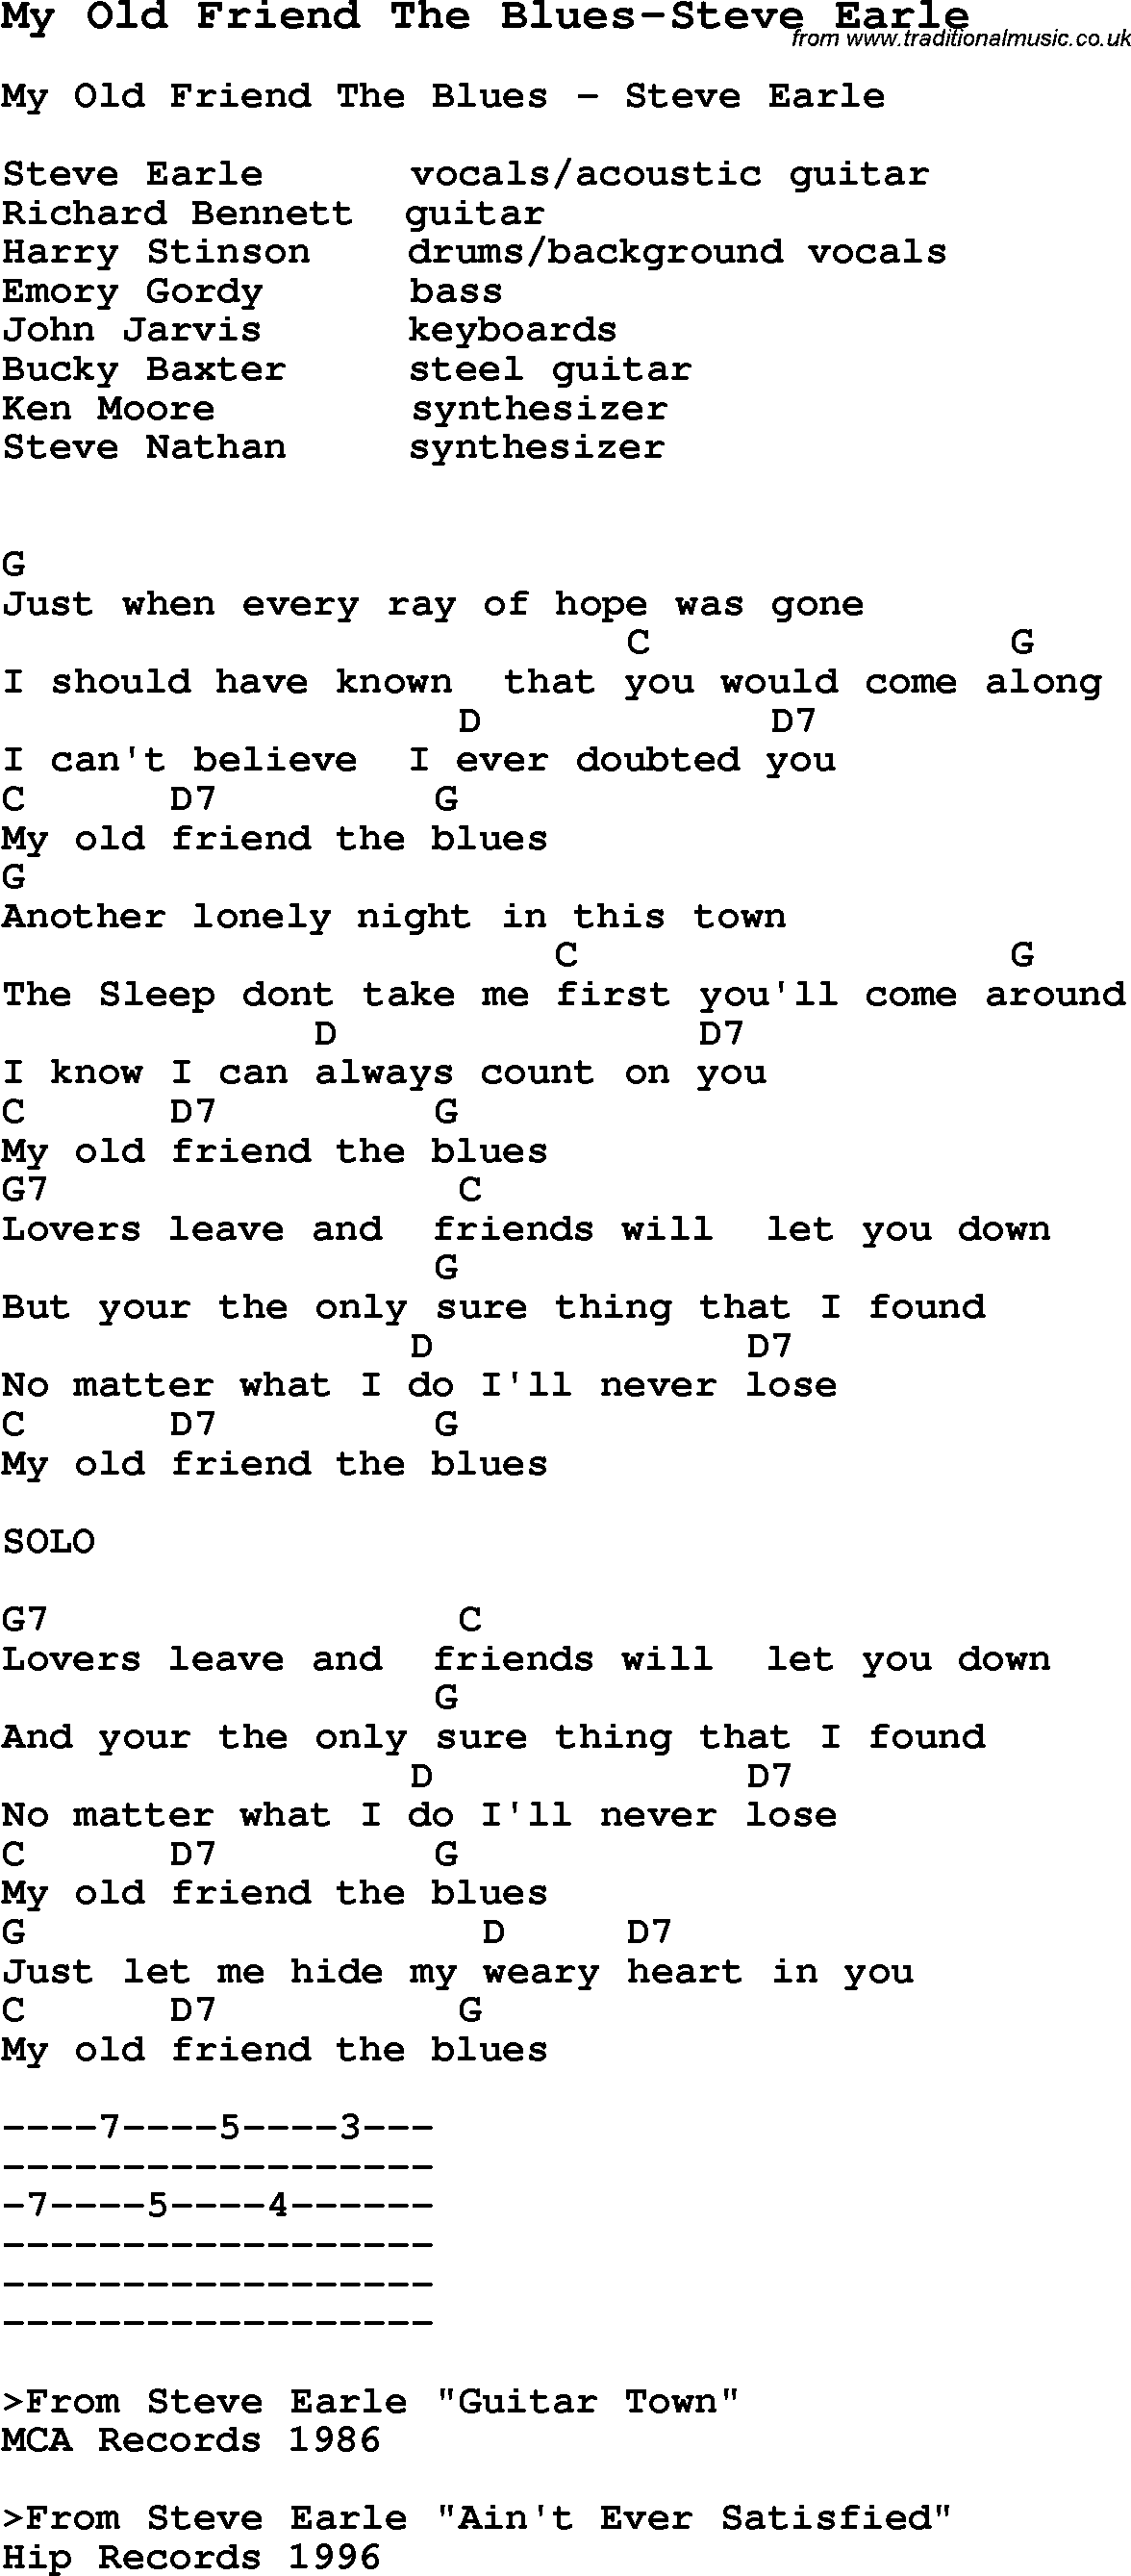 Blues Guitar Song, lyrics, chords, tablature, playing hints for My Old Friend The Blues-Steve Earle